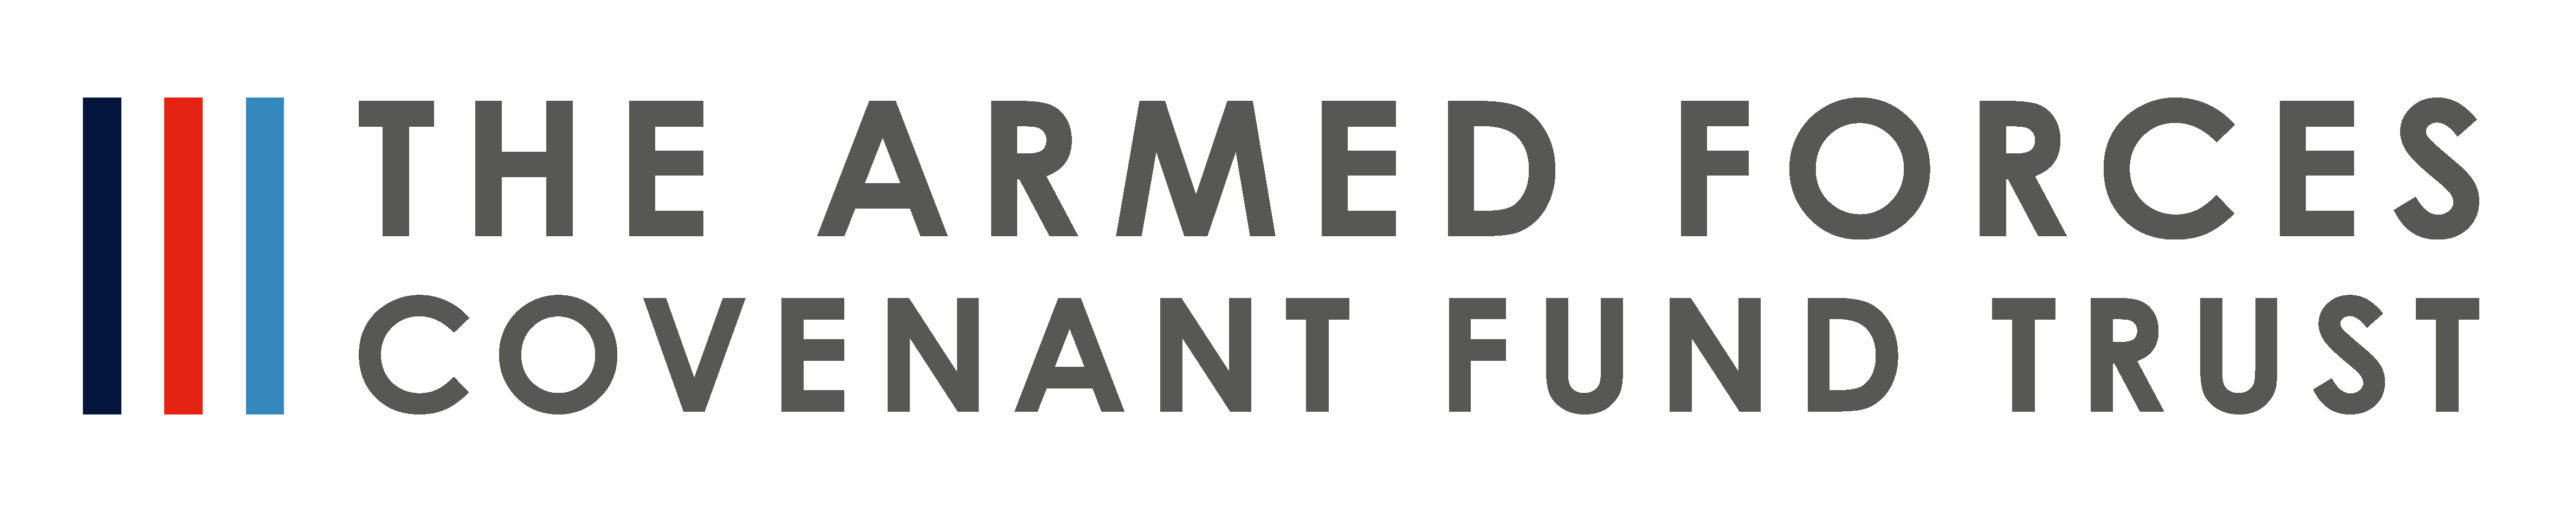 The Armed Forces Covenant Fund Trust logo.jpg